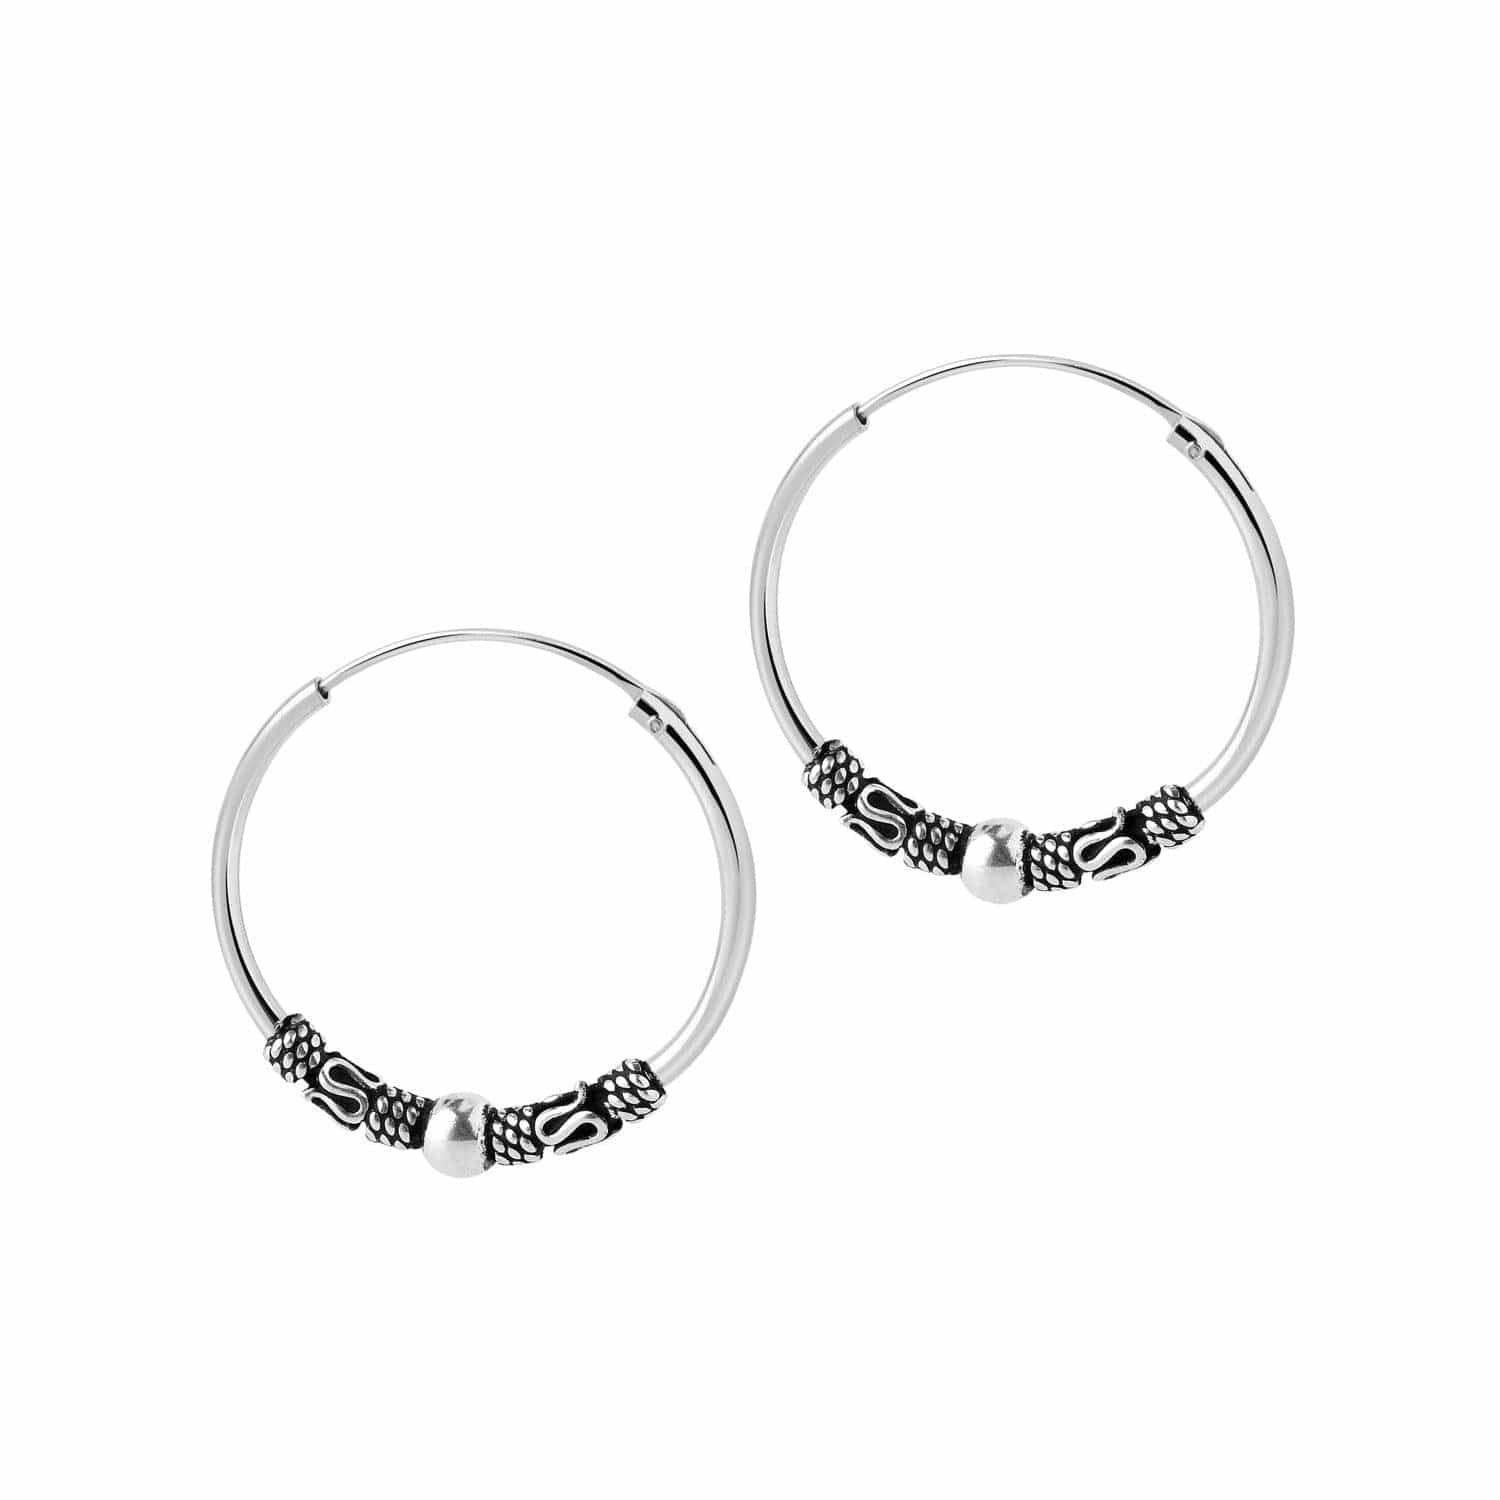 Silver Bali Hoop Earrings Niaga with ball and snake pattern